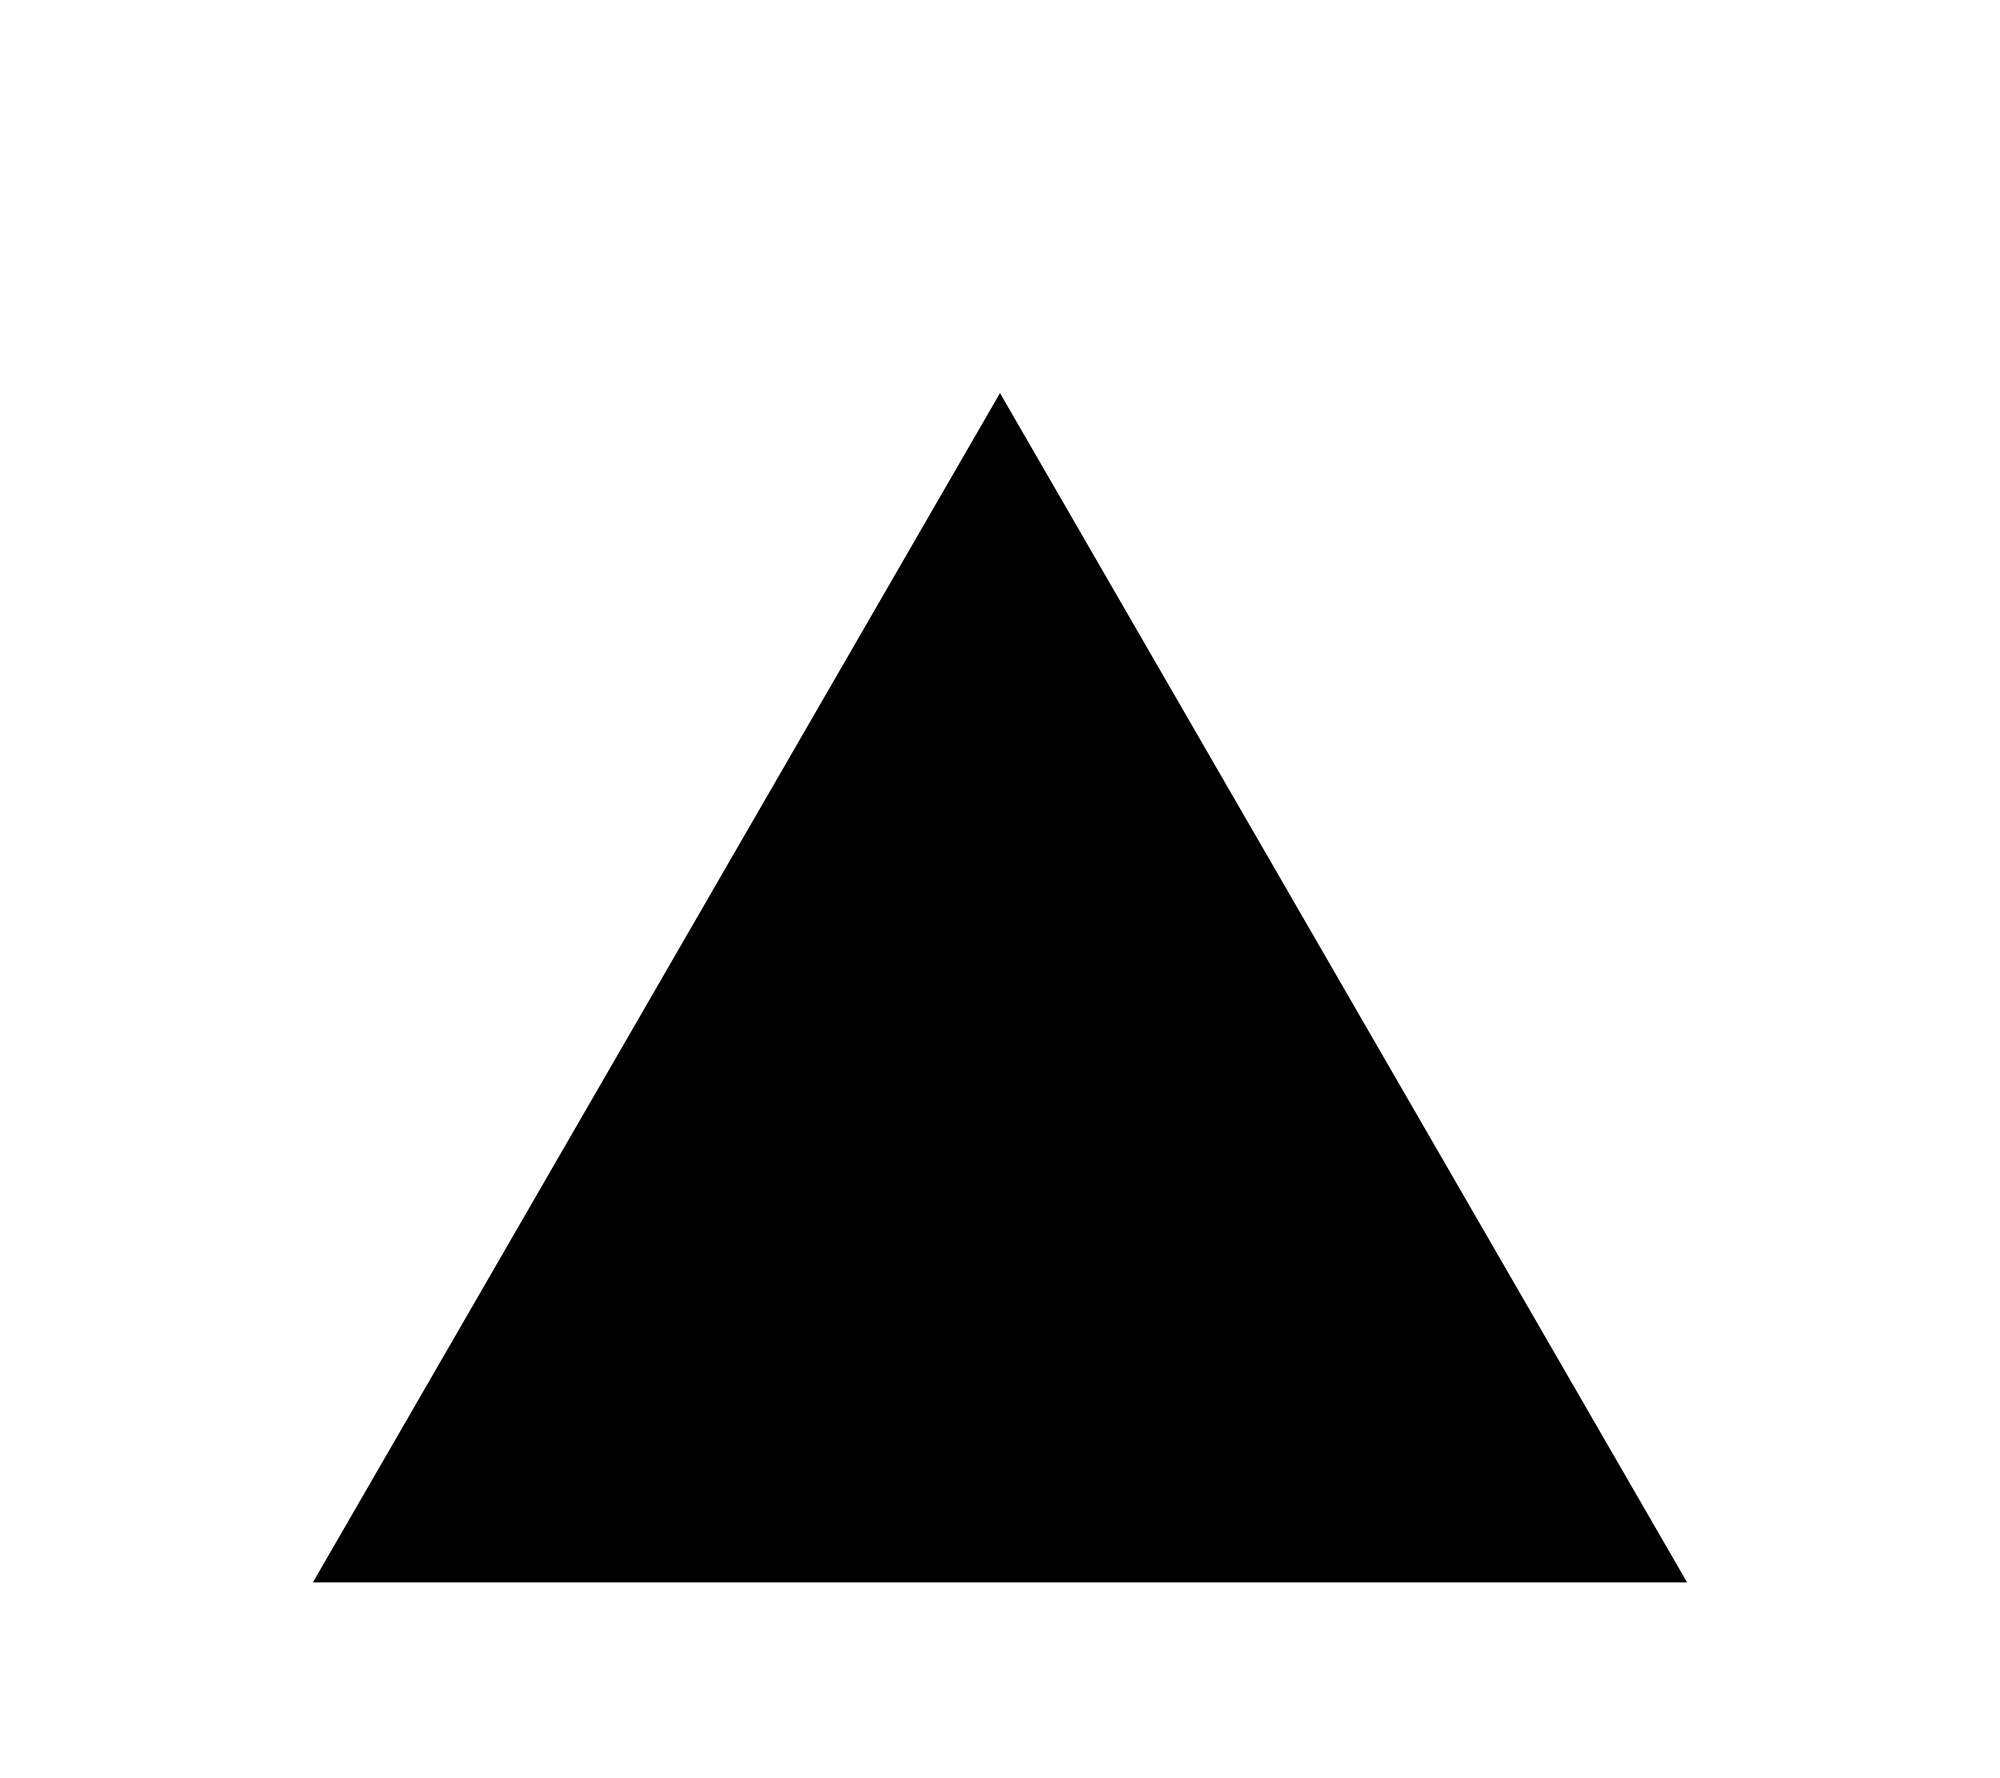 Black Triangle Logo - File:Black triangle with thick white border.svg - Wikimedia Commons